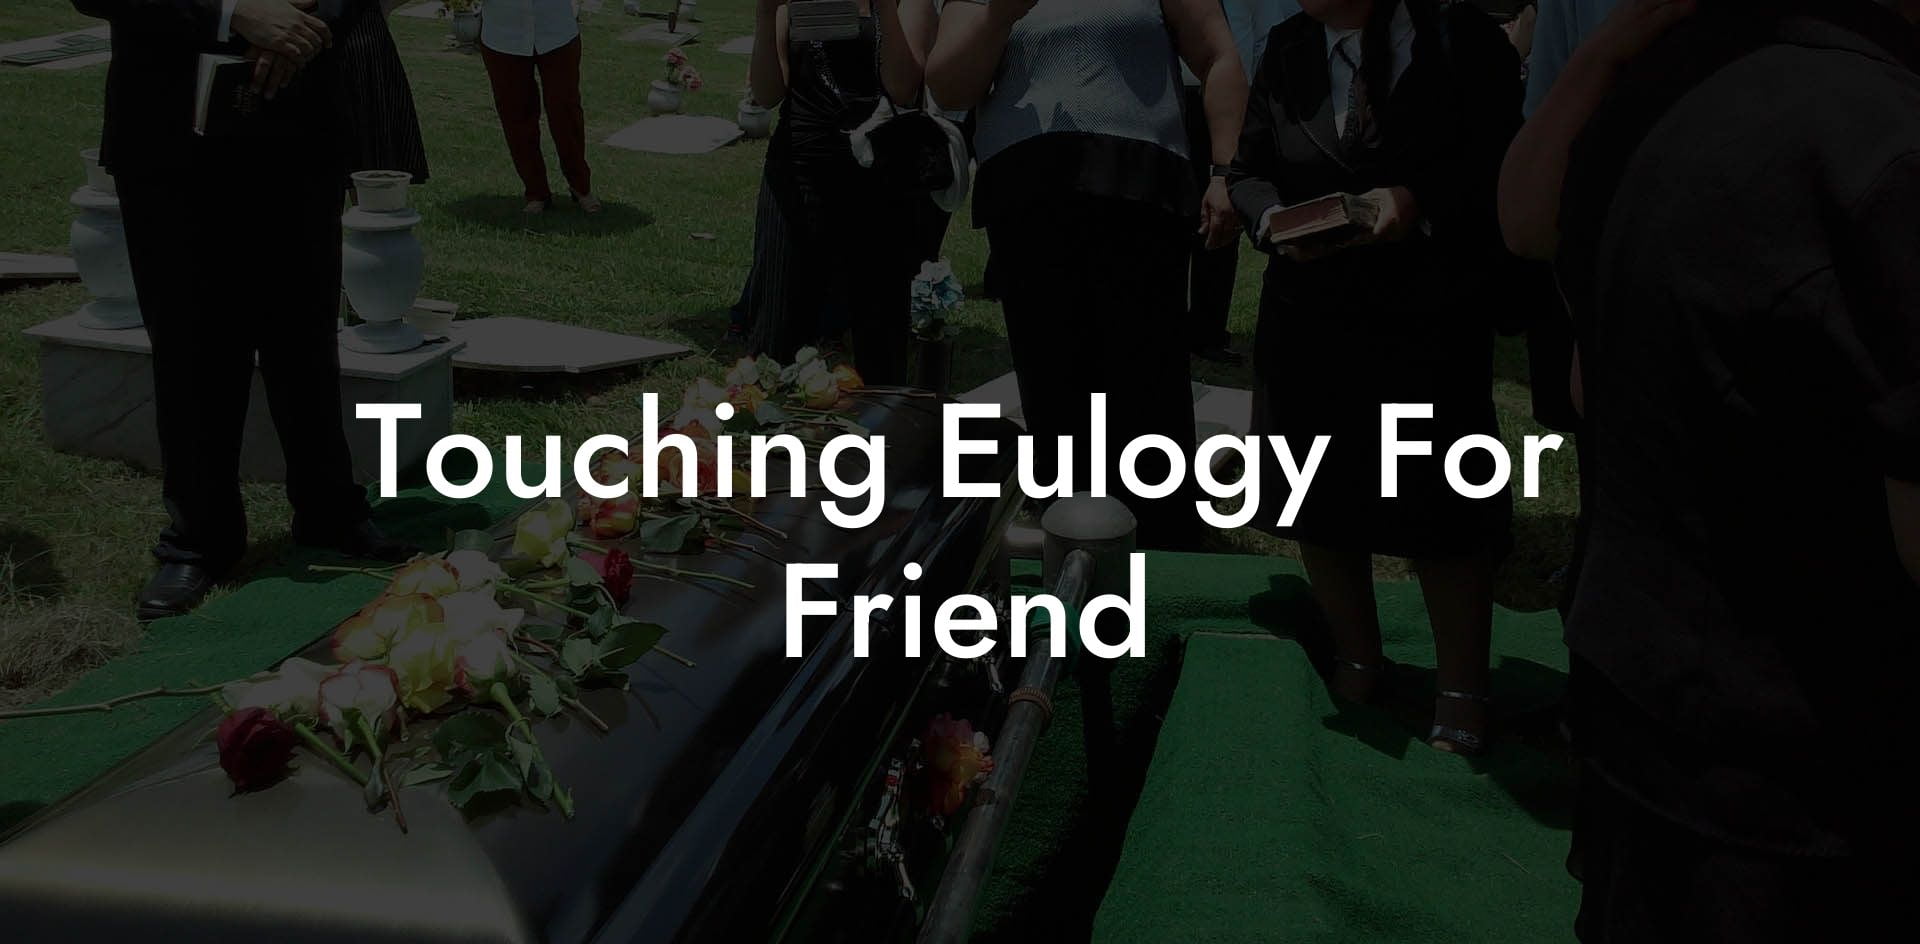 Touching Eulogy For Friend